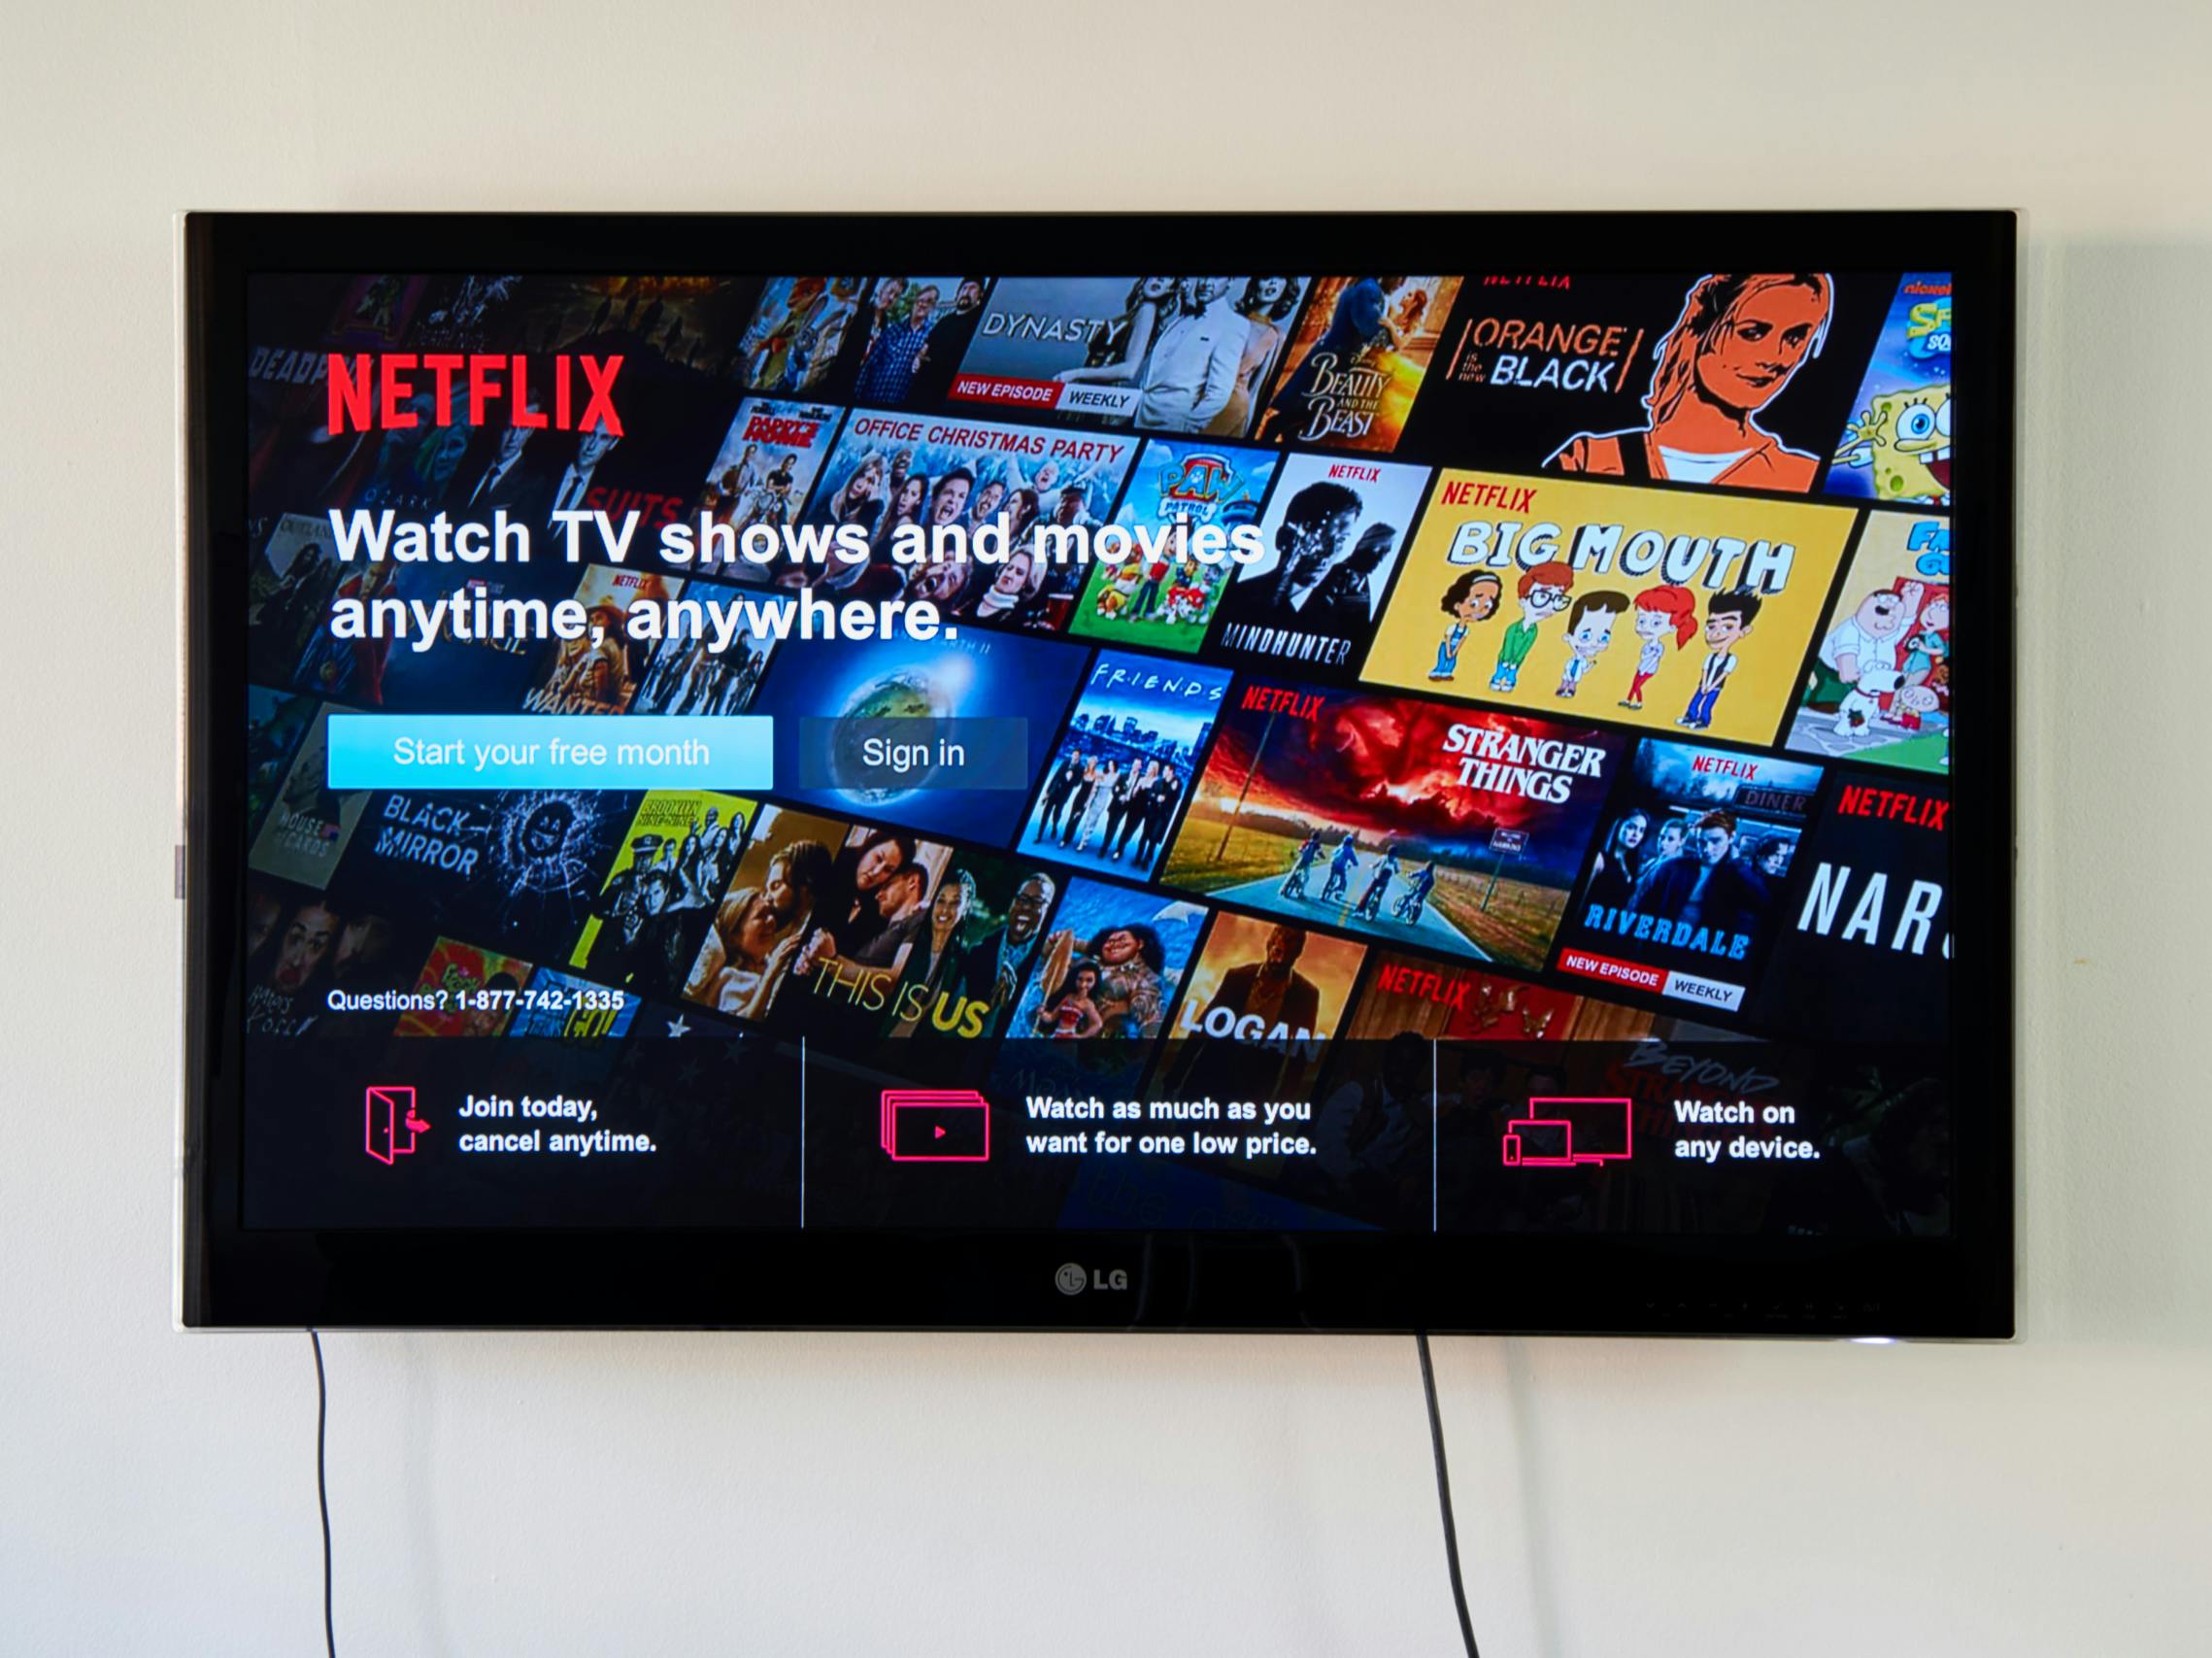 Netflix streaming service on a wall mounted tv